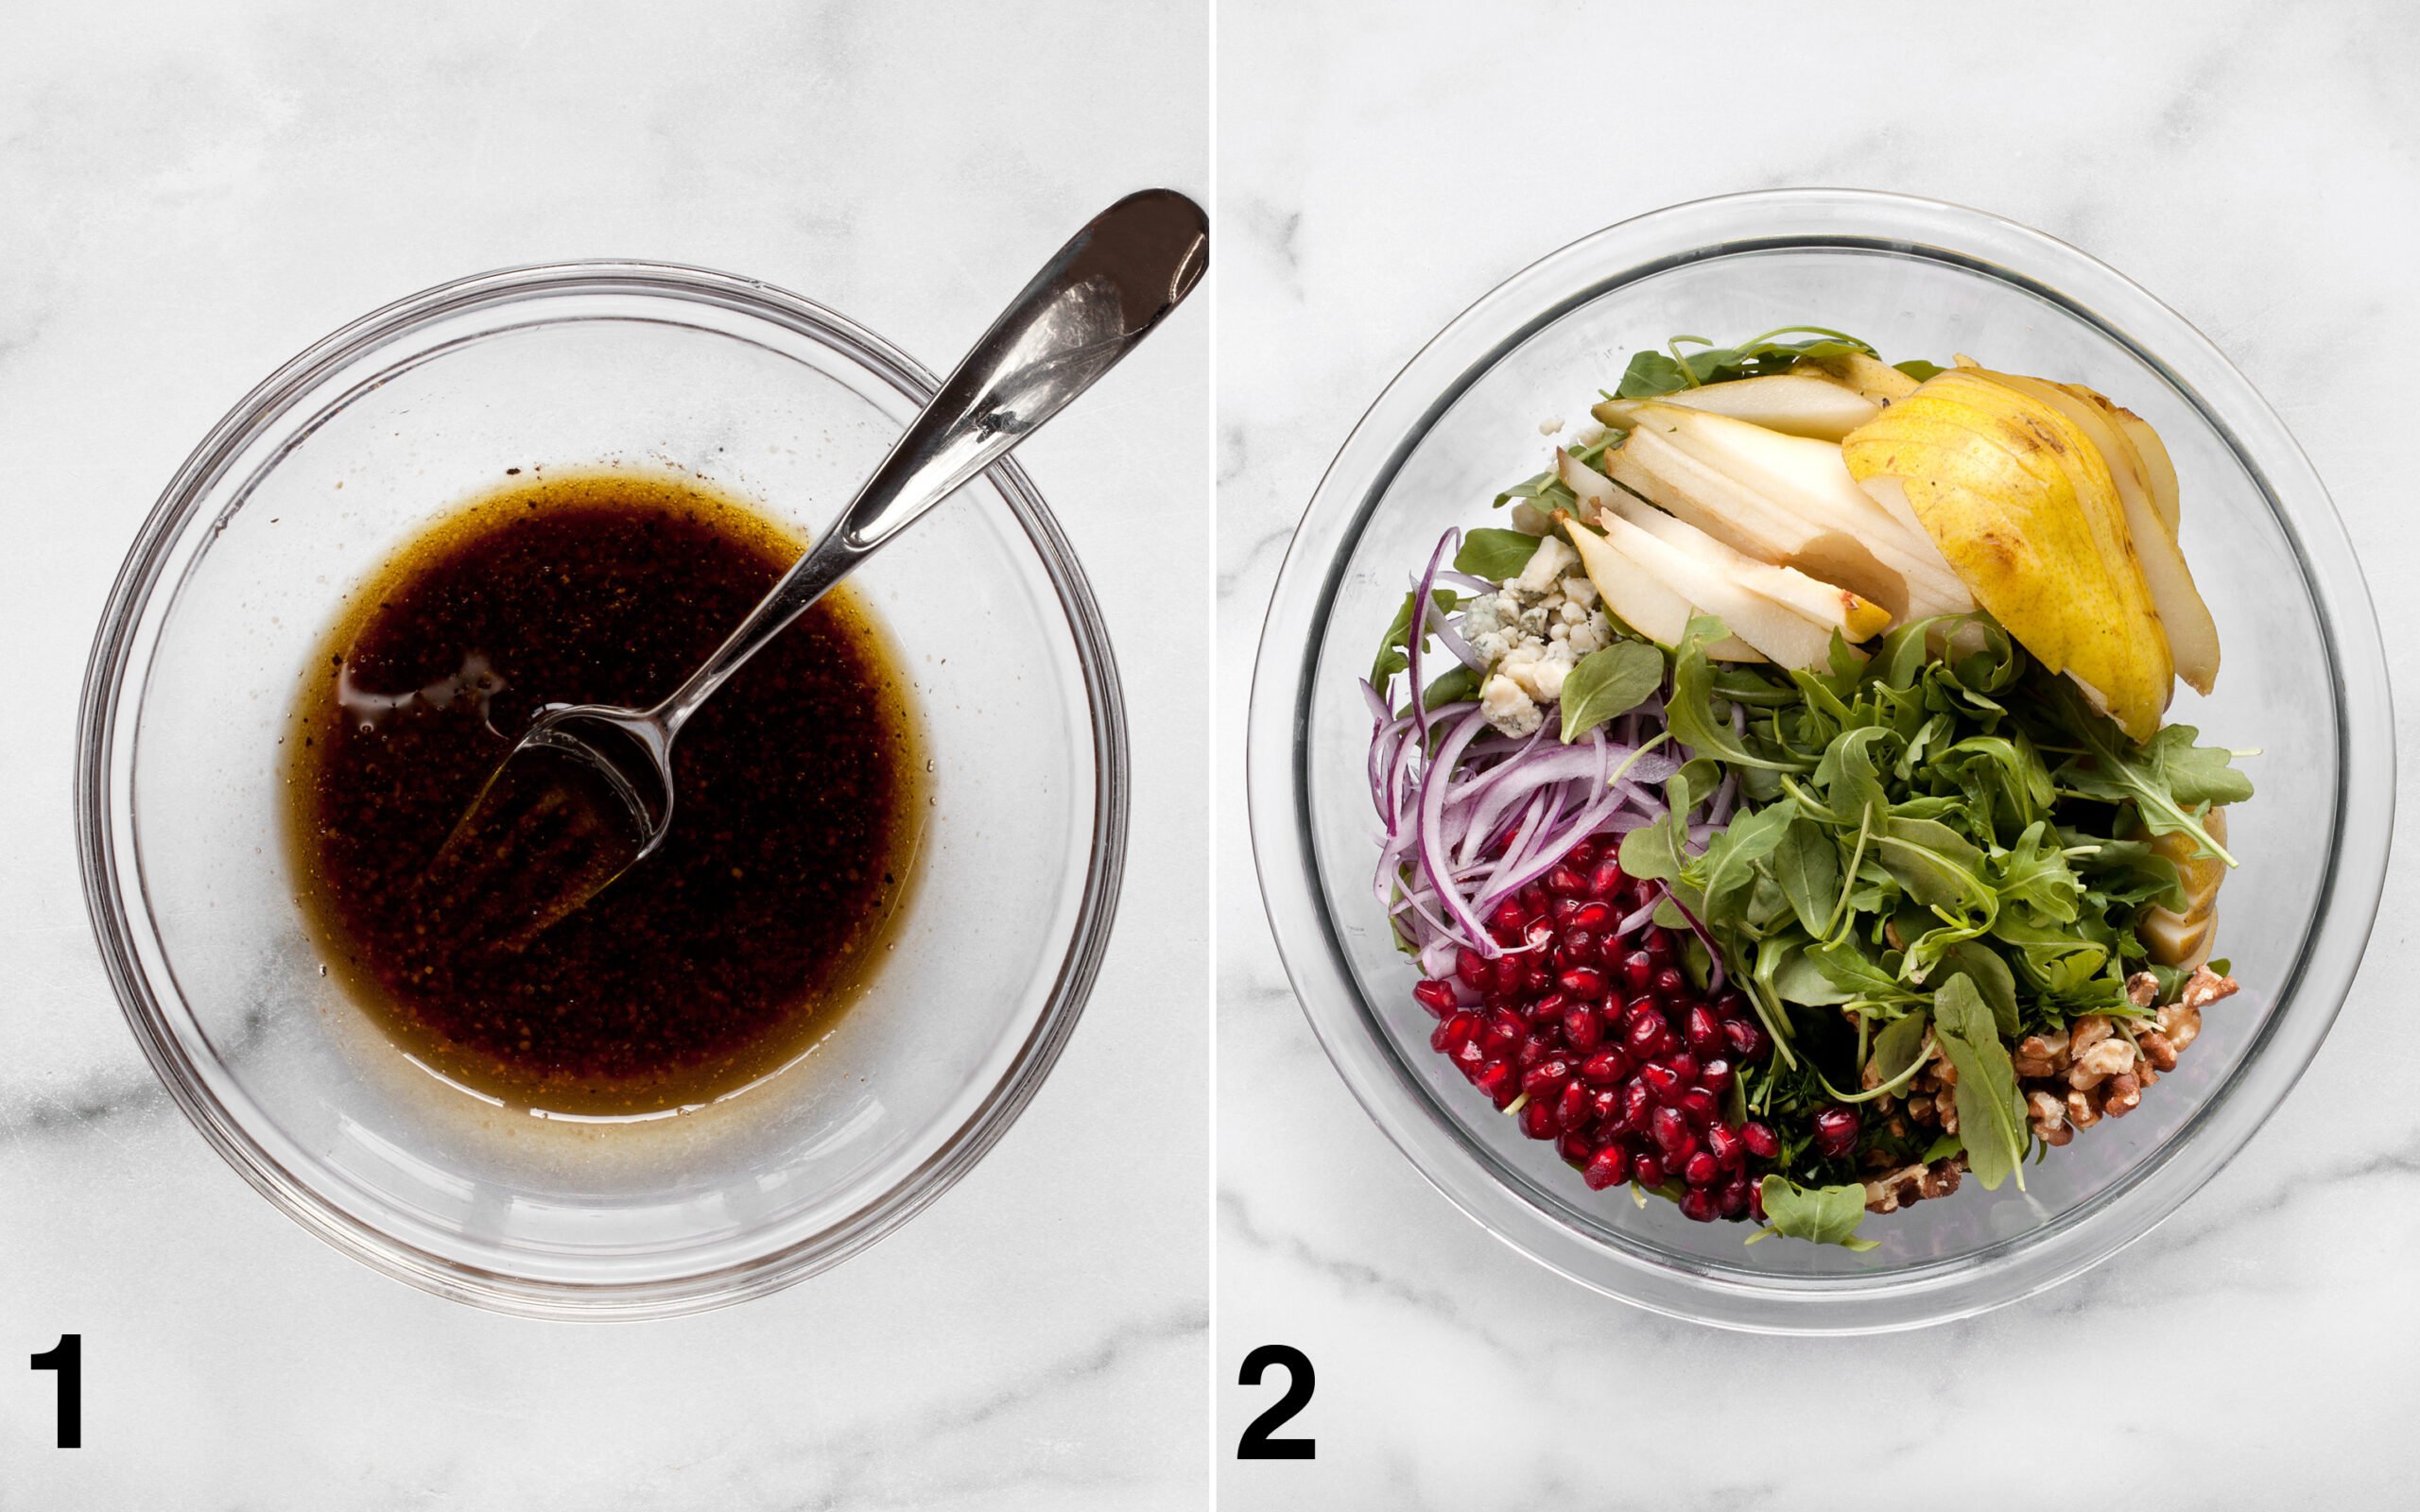 In a small bowl, whisk together the balsamic vinaigrette. Then combine the salad ingredients in a large bowl.